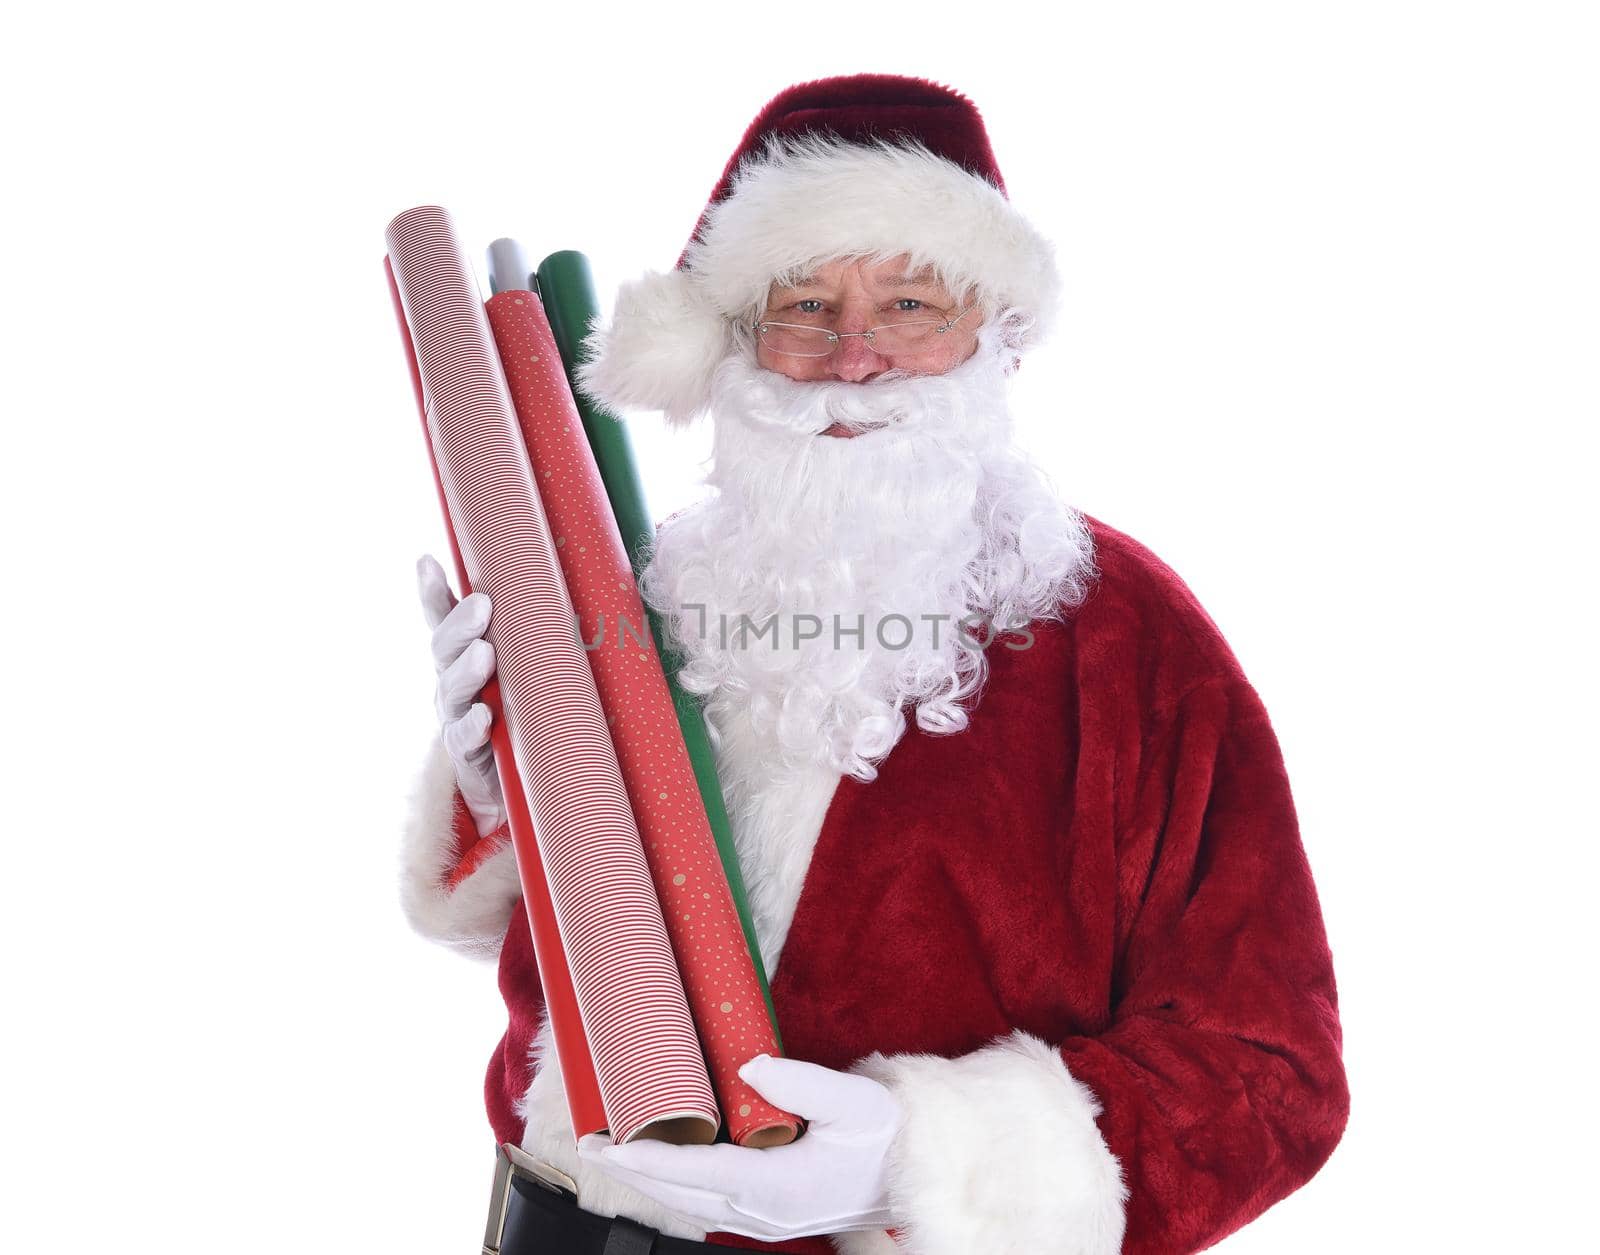 Santa Claus holding several rolls of Christmas gift wrapping paper, isolated on whtie.